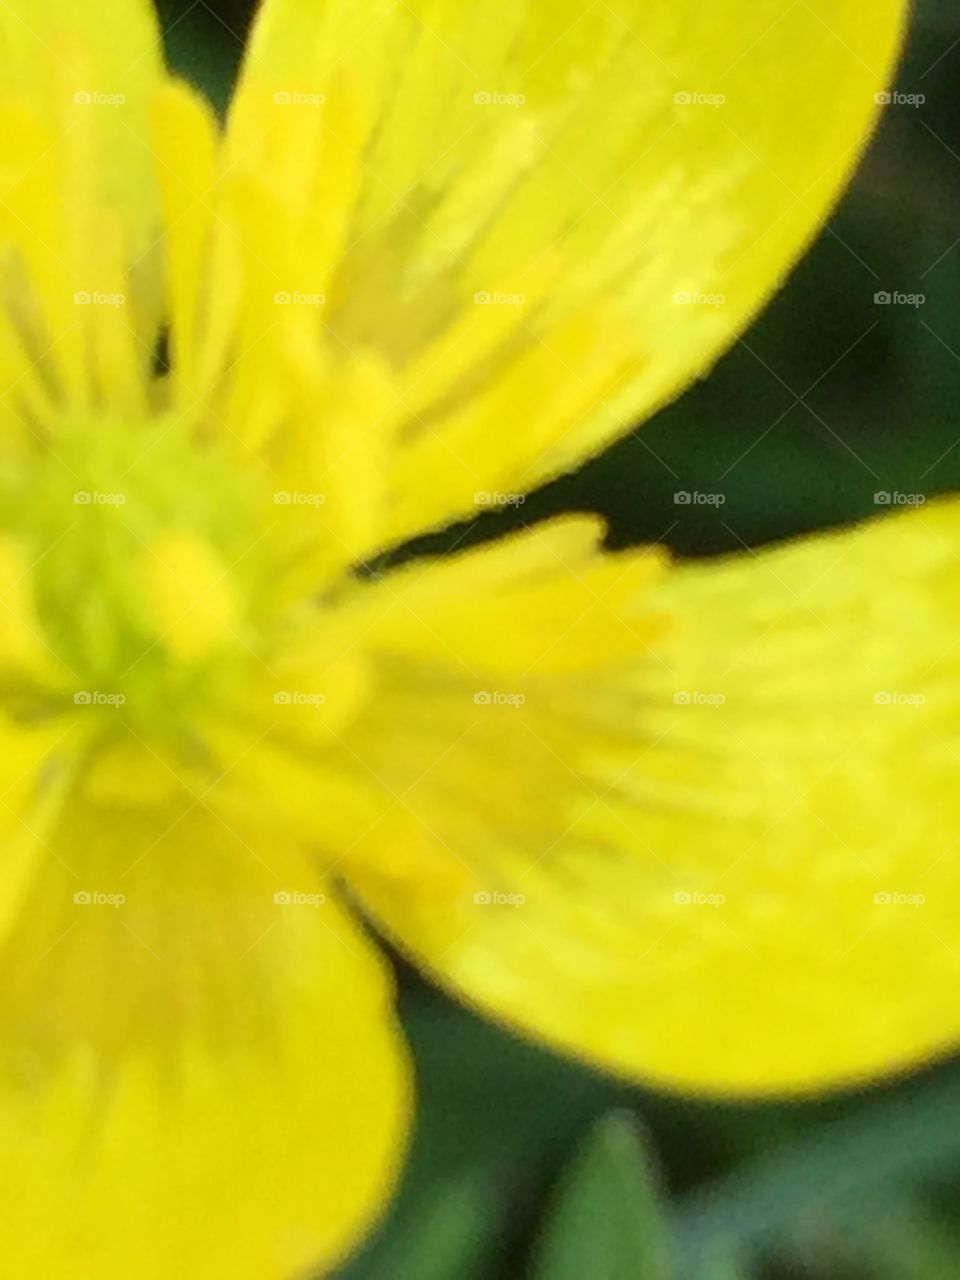 Blurry photo of a flower